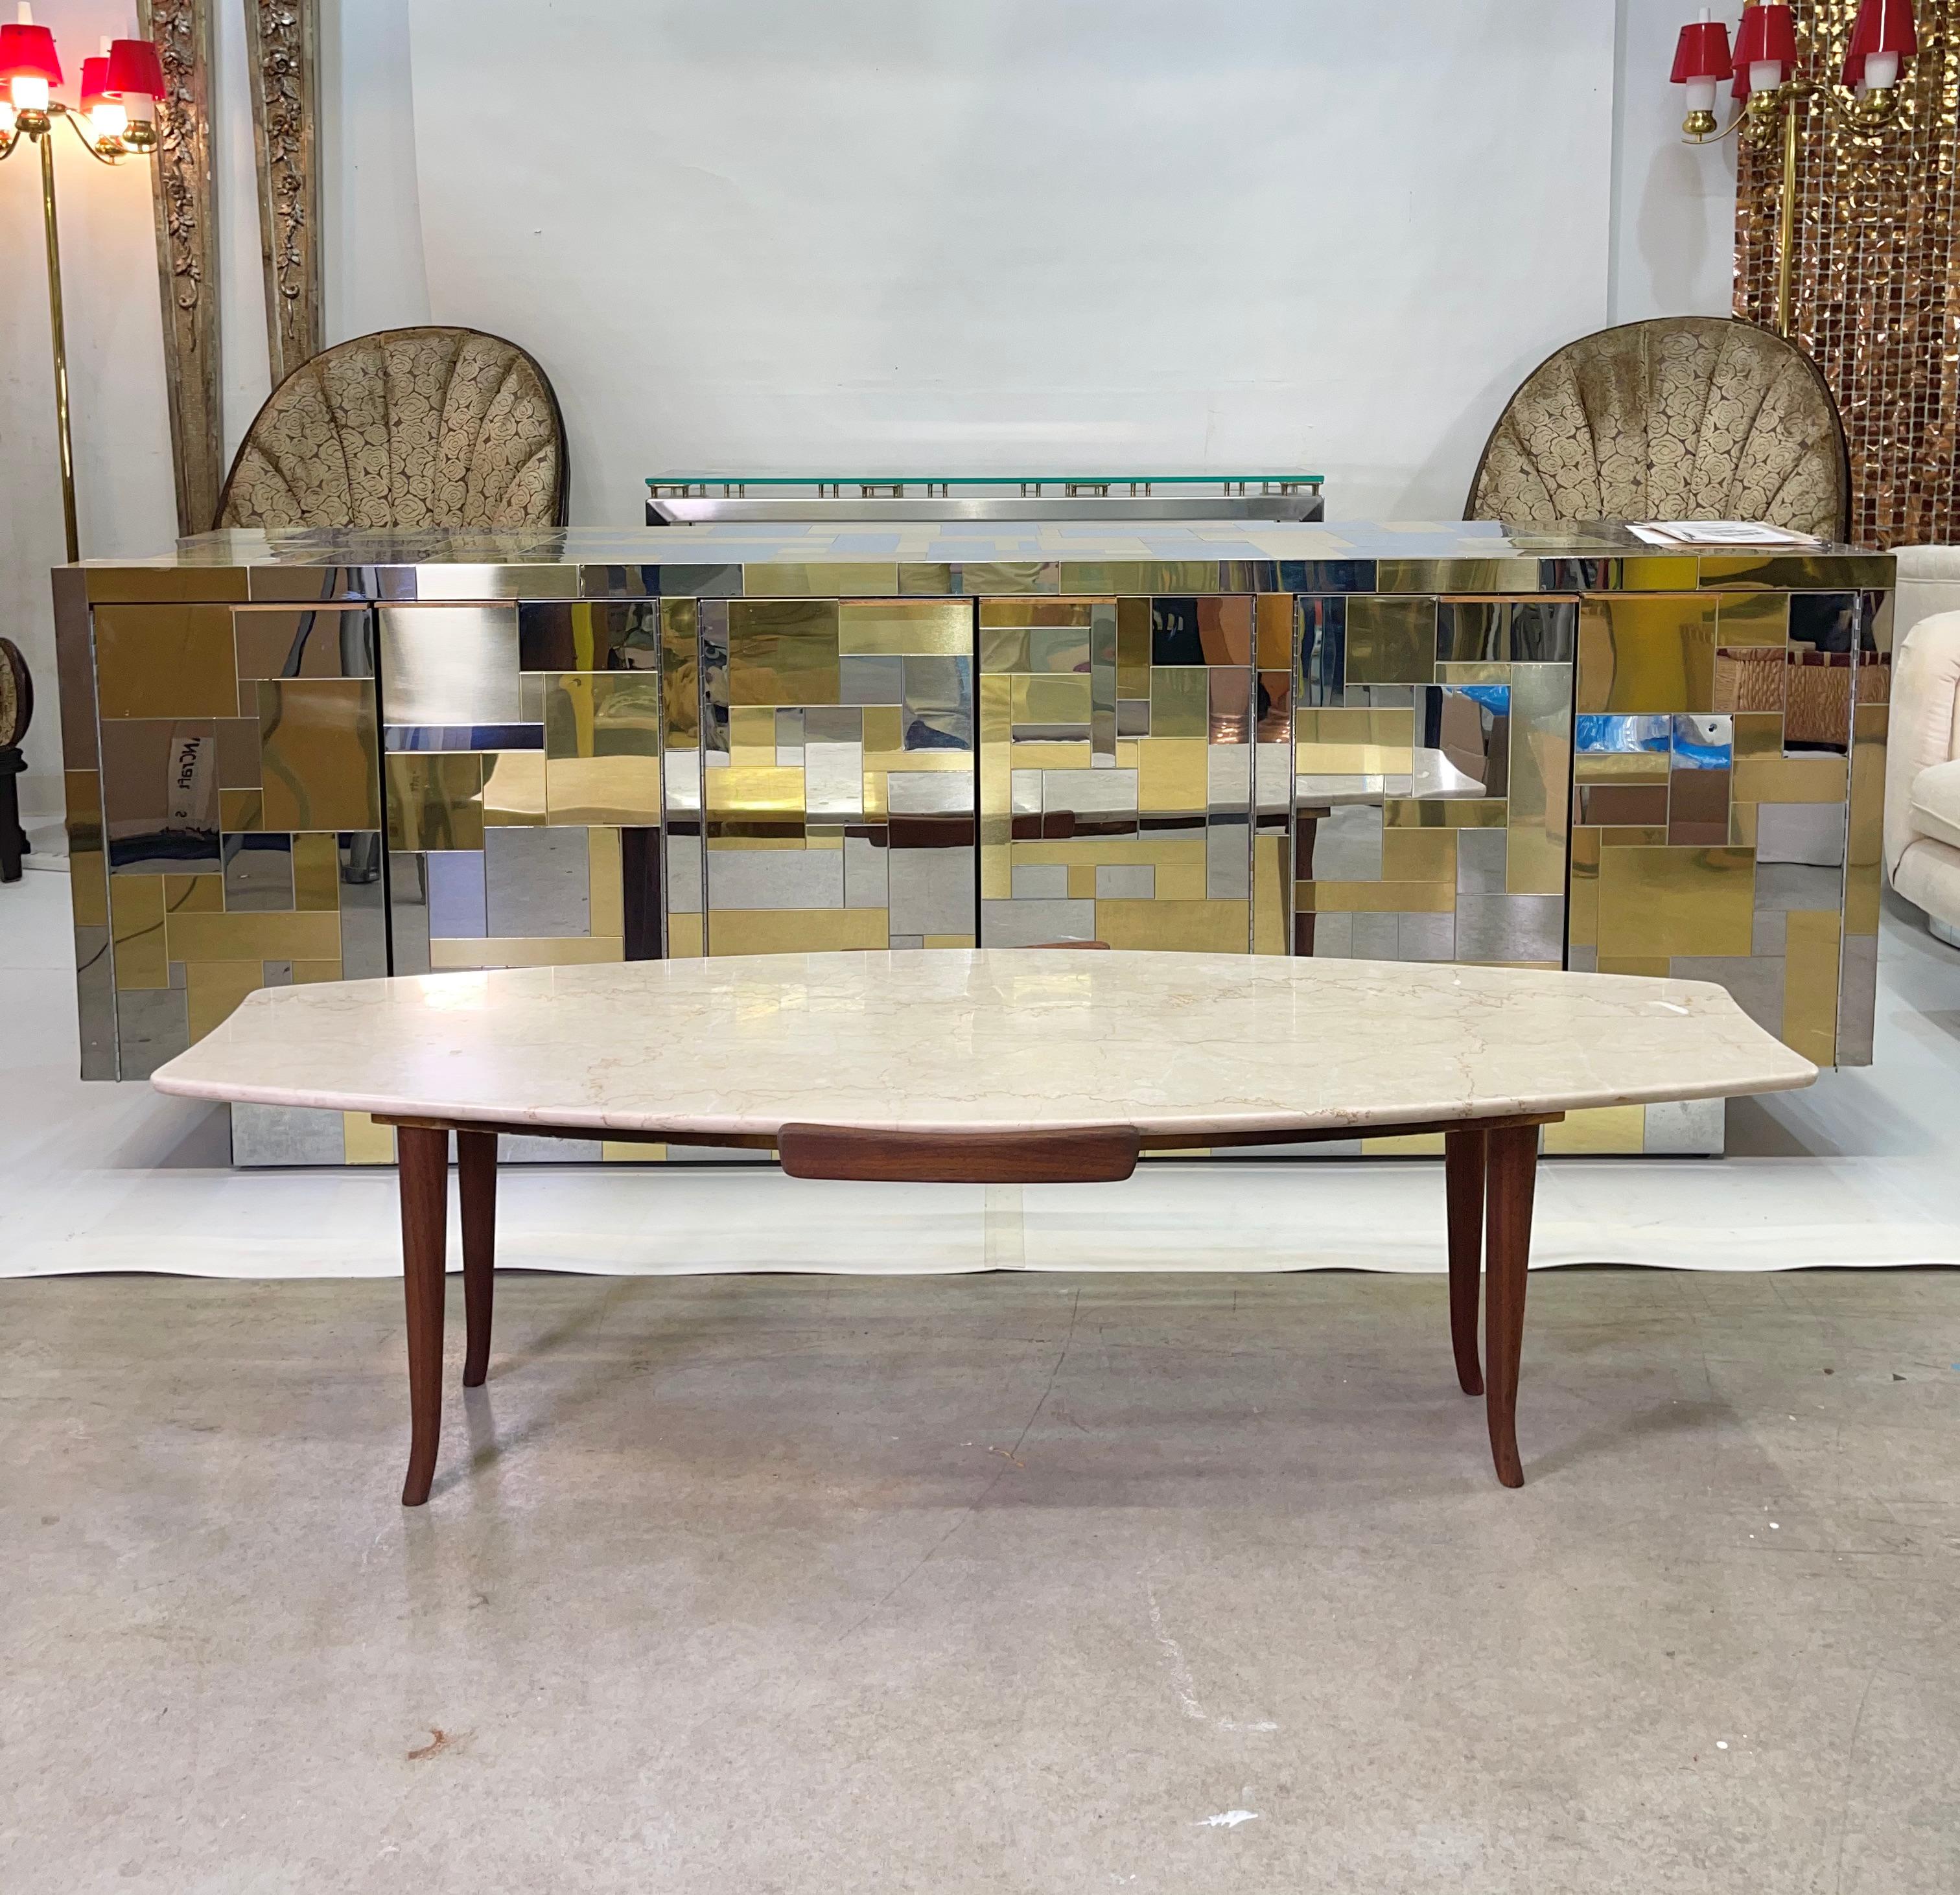 This table came from the collection of a prominent child psychiatrist and a magnificent apartment on Central Park West furnished in original Italian Mid-Century Modern furnishings sourced from M. Singer & Son's, Altamira and Venini, circa